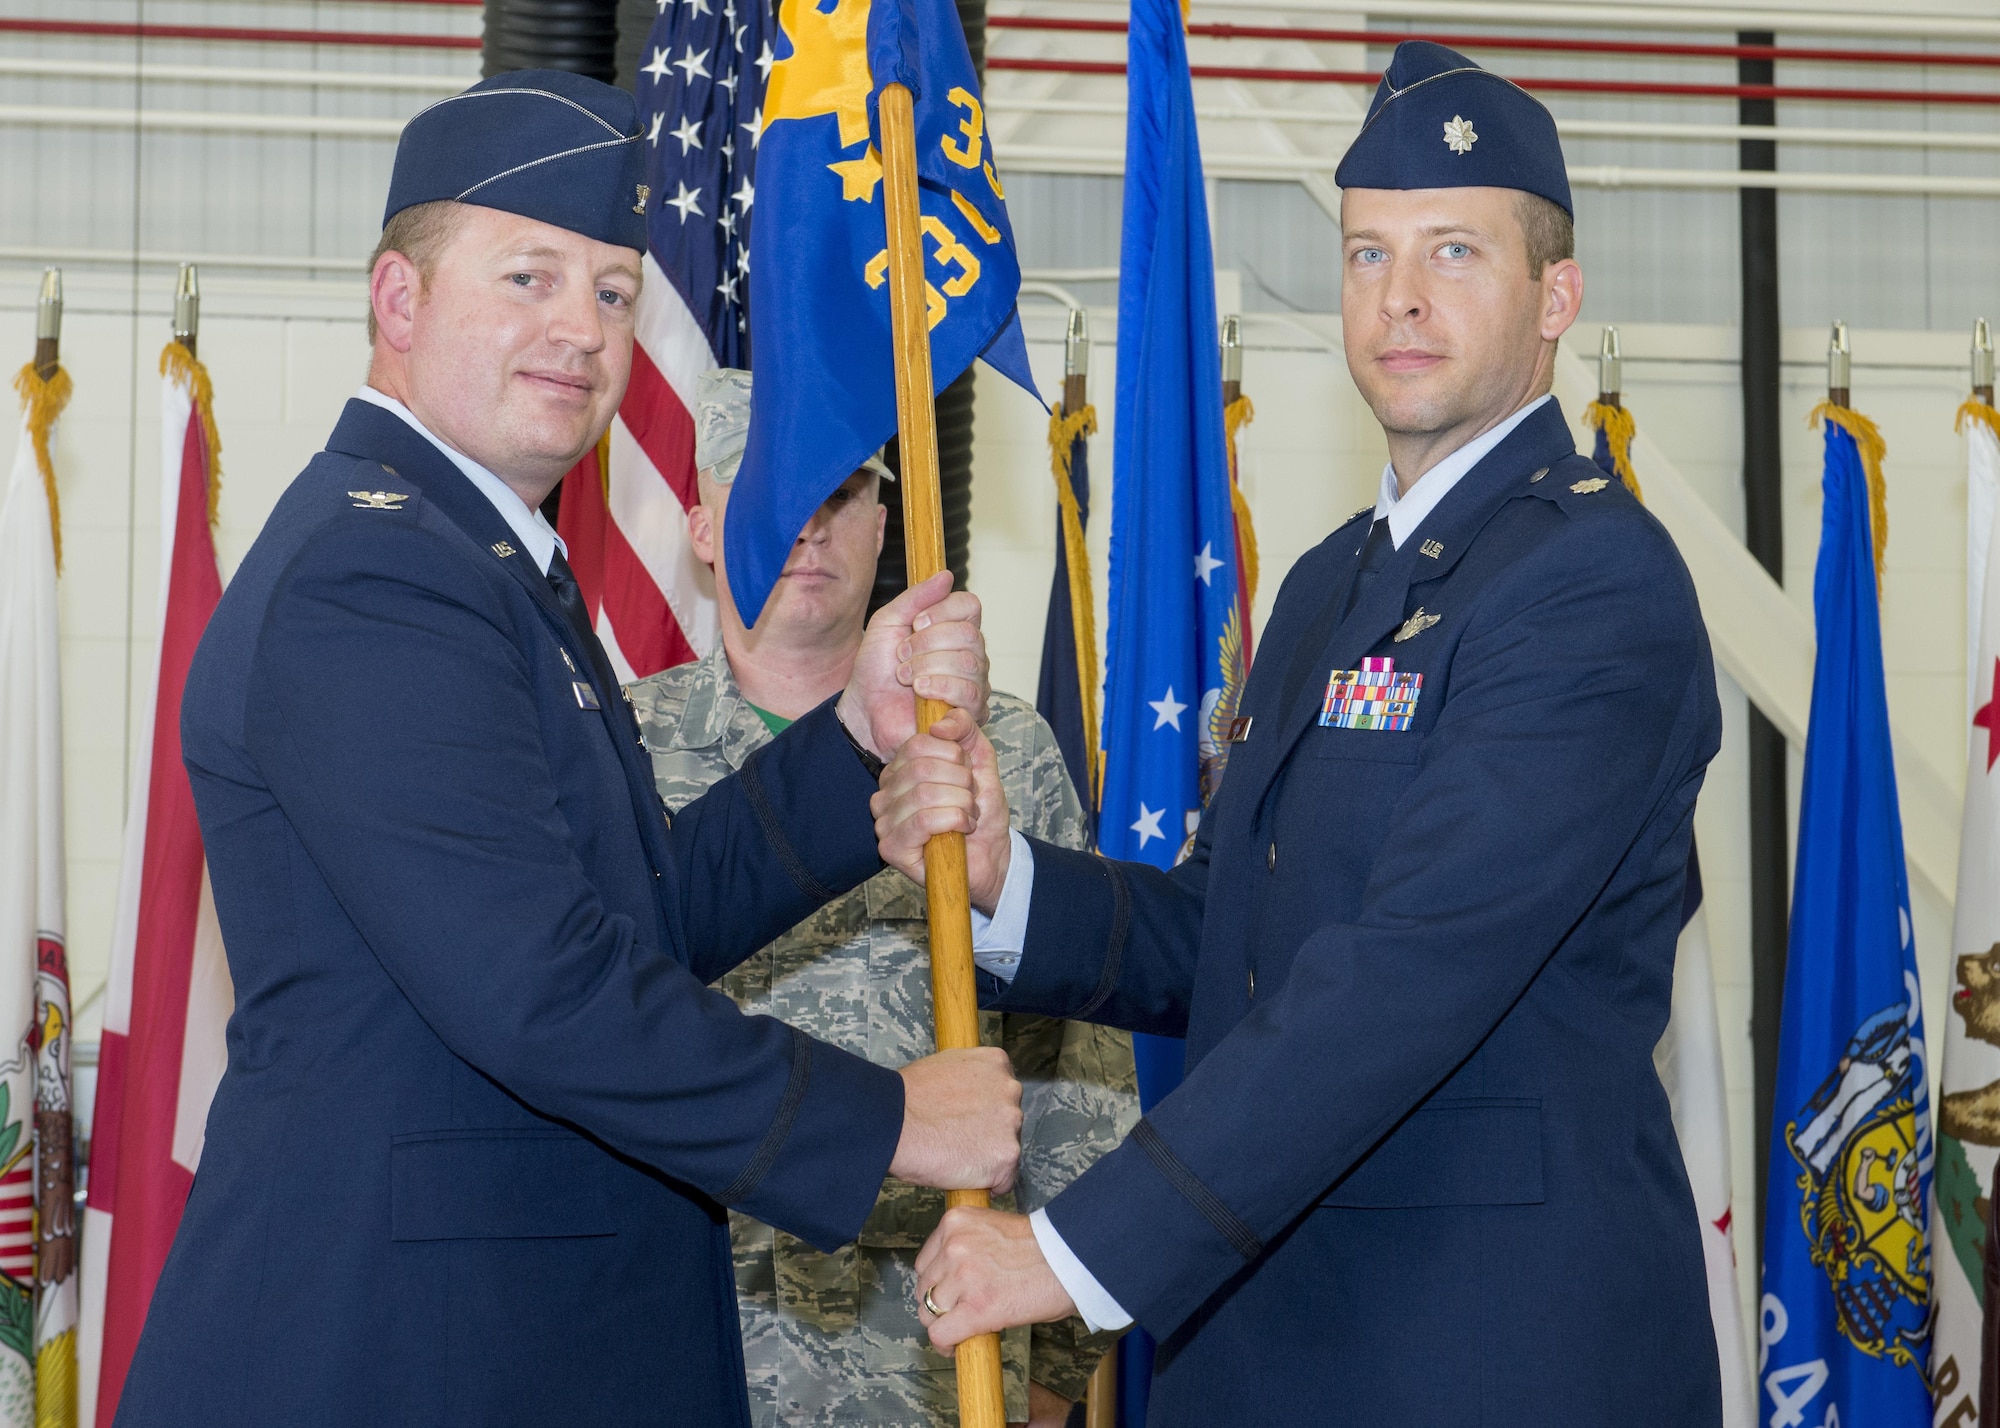 Col. Ryan Suttlemyre, 33rd Operations Group commander, passes the 33rd Operations Support Squadron guidon to Lt. Col. Scott Gunn, 33rd OSS commander, during the 33rd OSS change of command ceremony June 24, 2016, at Eglin Air Force Base, Fla. The 33rd OSS oversees F-35 weapons and tactics training and aircrew flight equipment training at Eglin AFB as well as the training syllabus and operational intelligence training for both AFSOC and the F-35 program at Eglin AFB. (U.S. Air Force photo by Senior Airman Stormy Archer/Released)